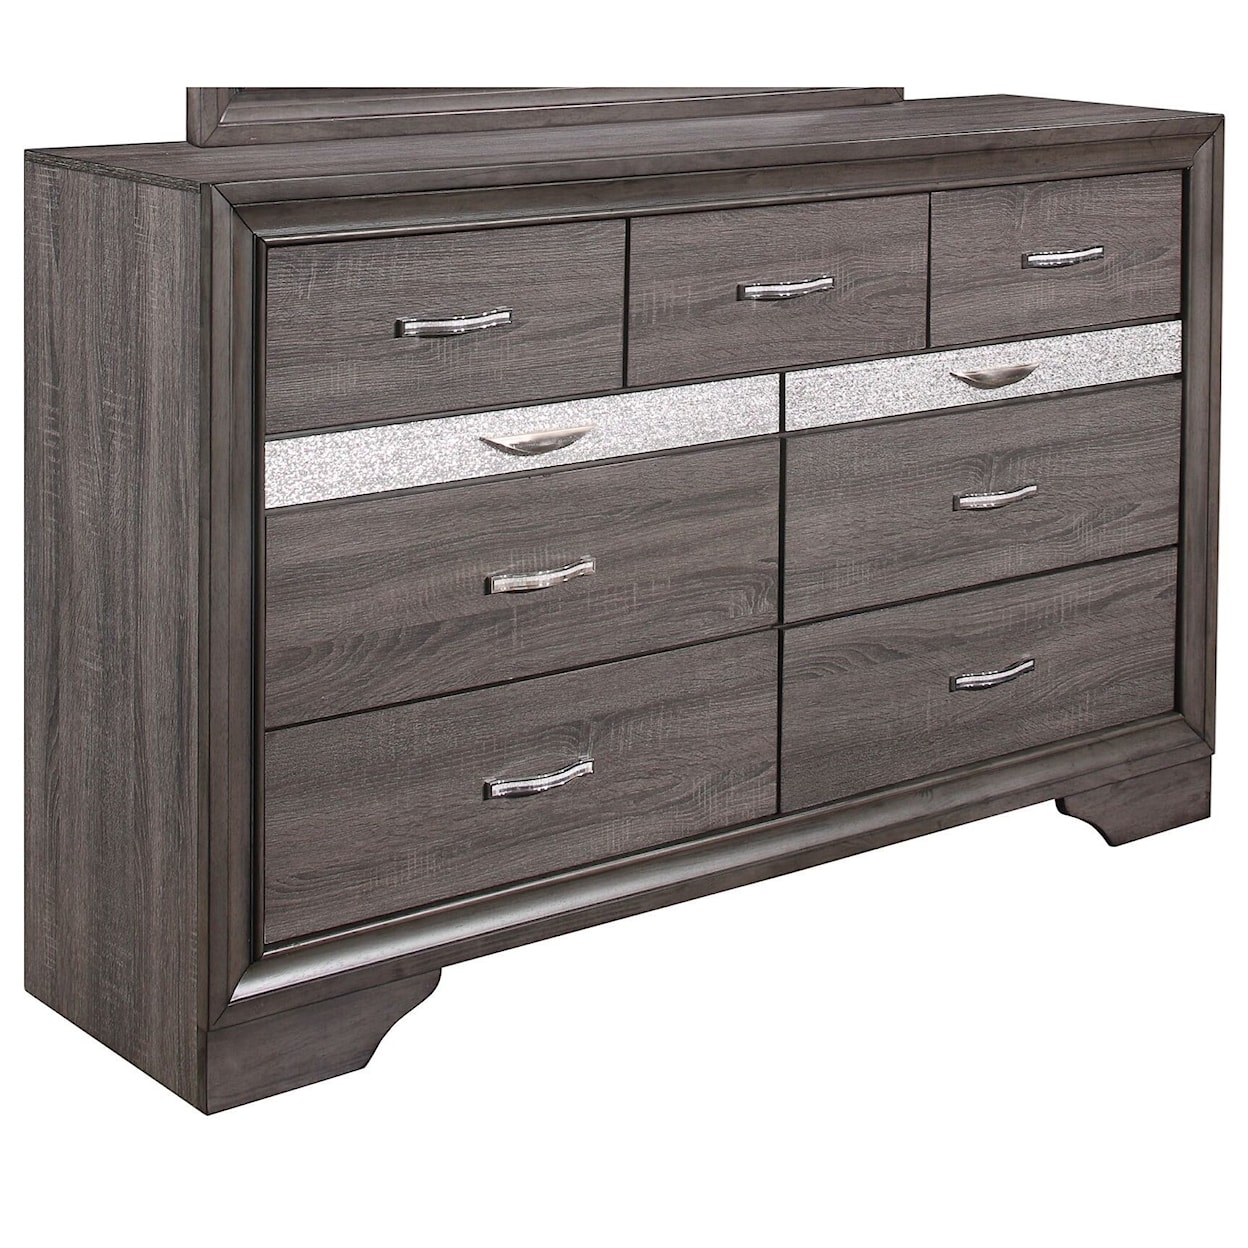 Global Furniture Seville Dresser with Jewelry Drawers